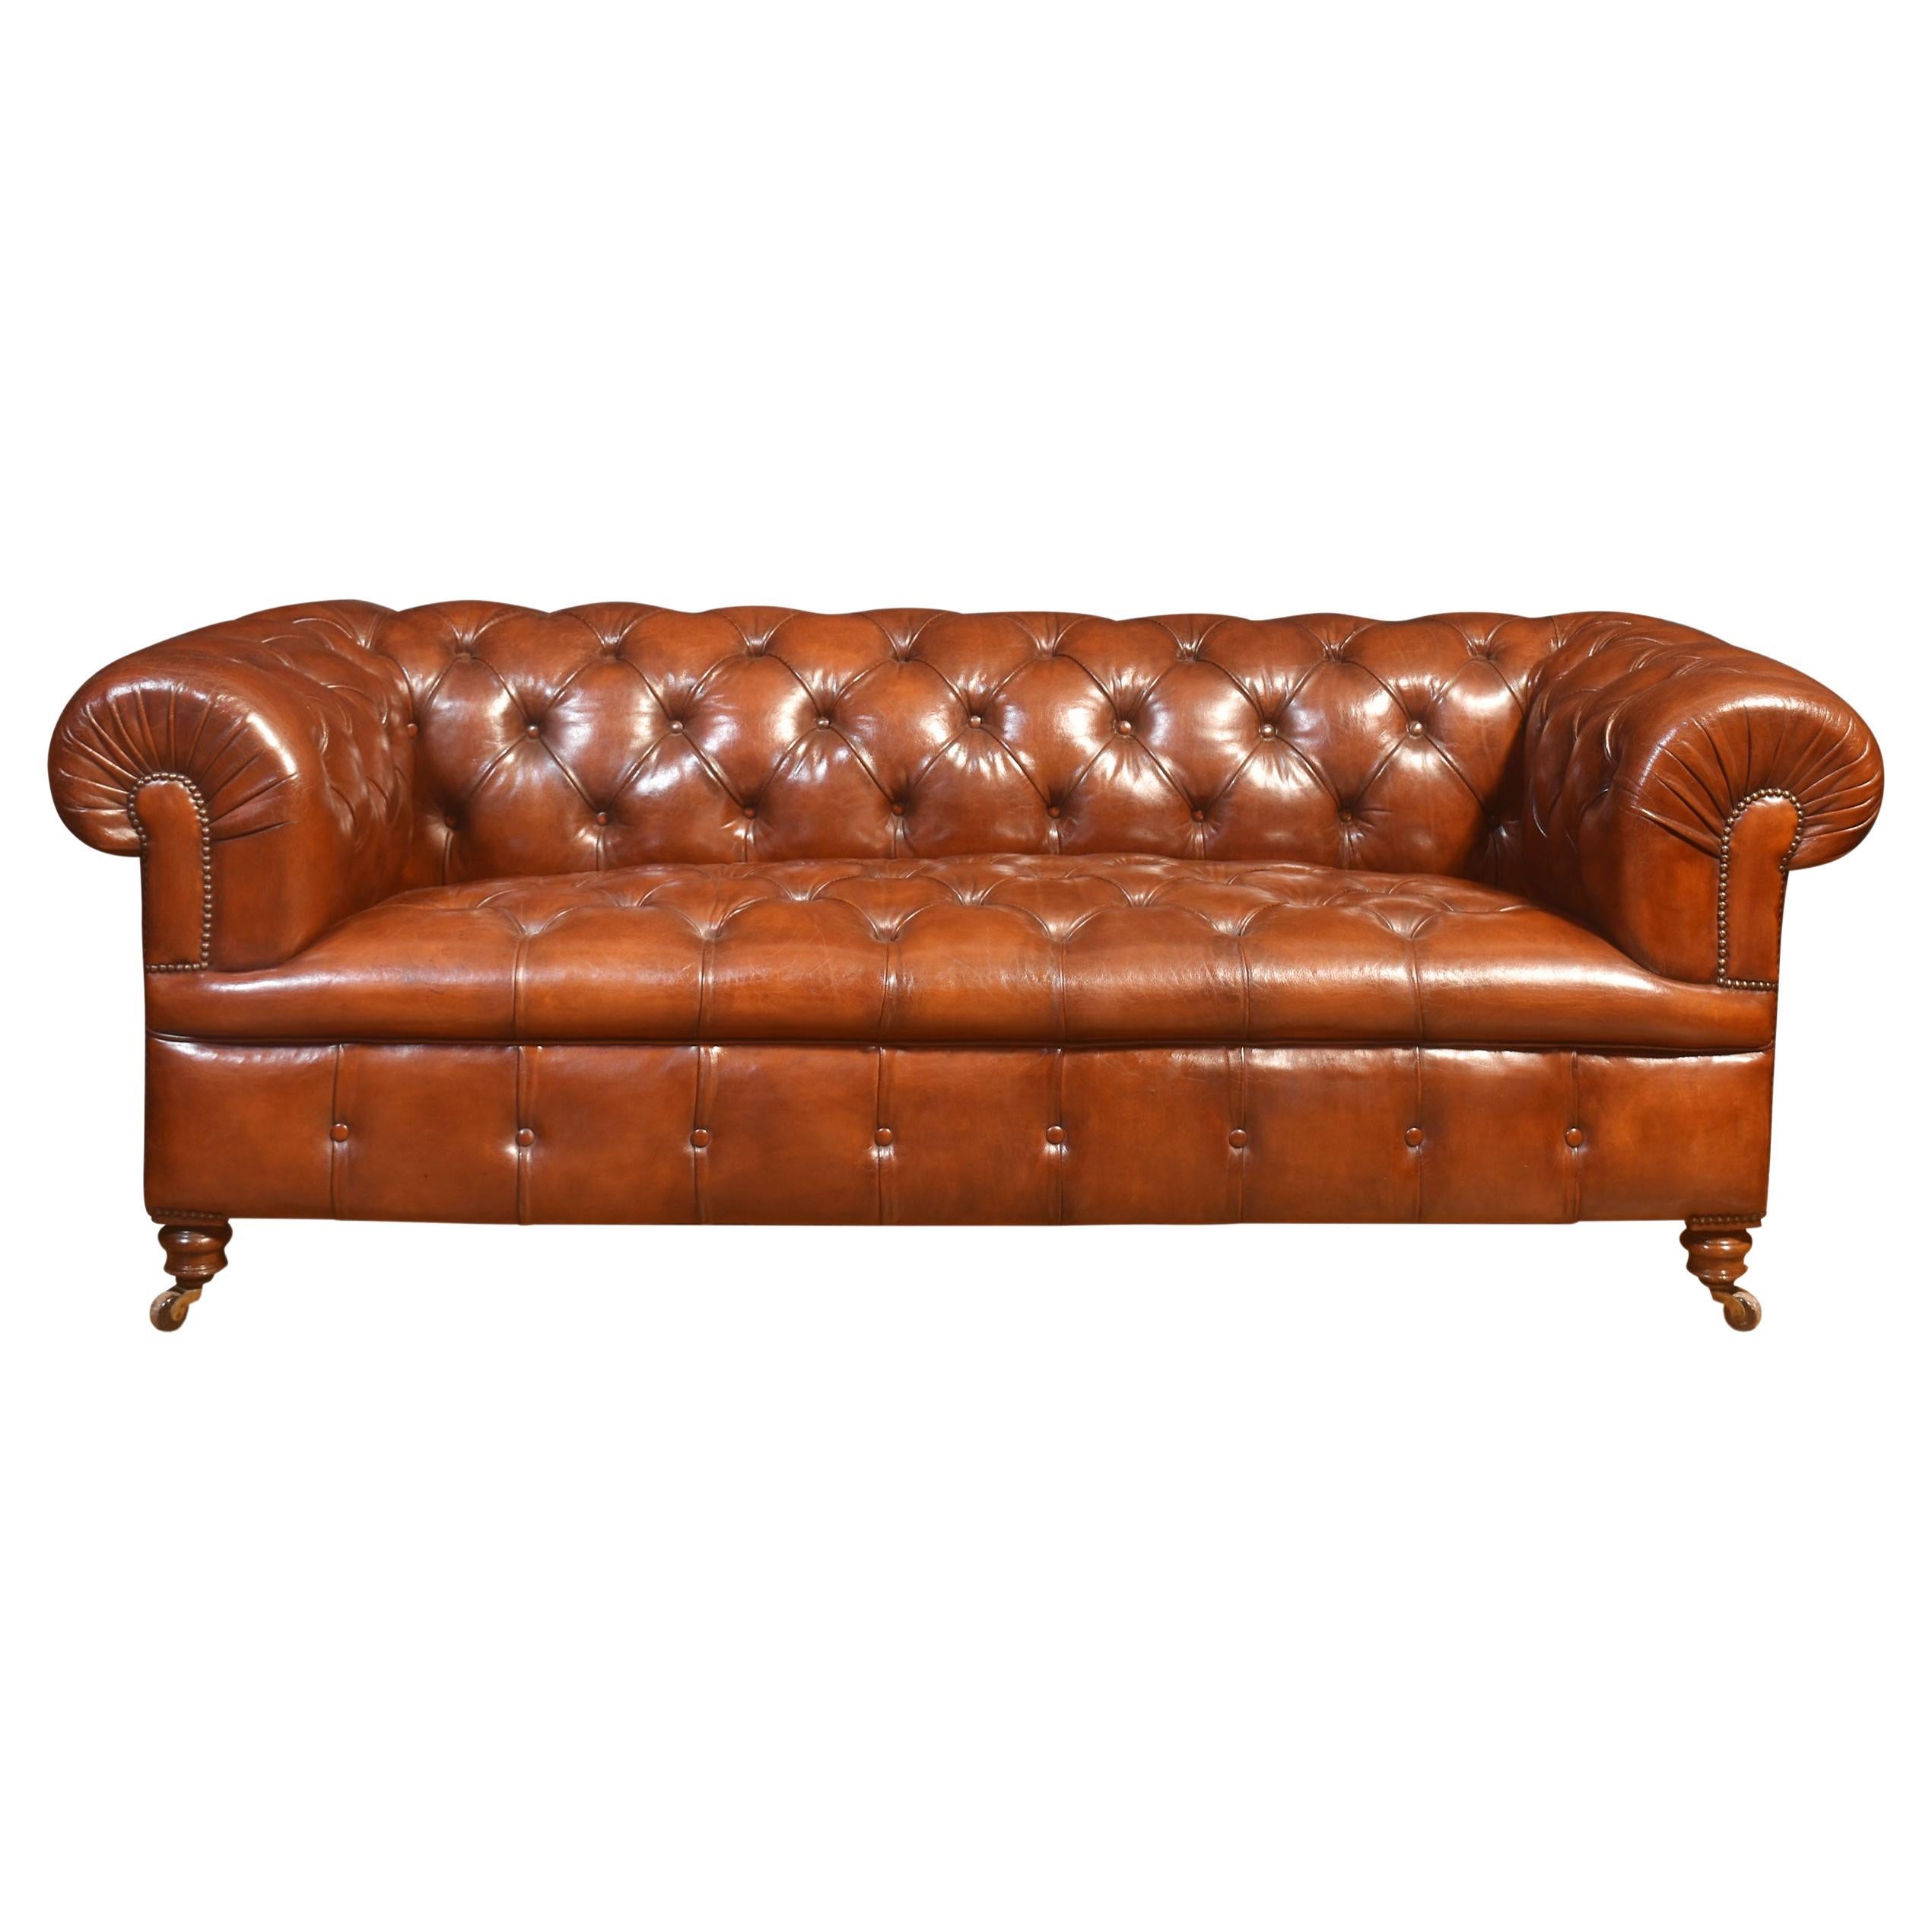 Leather deep buttoned chesterfield